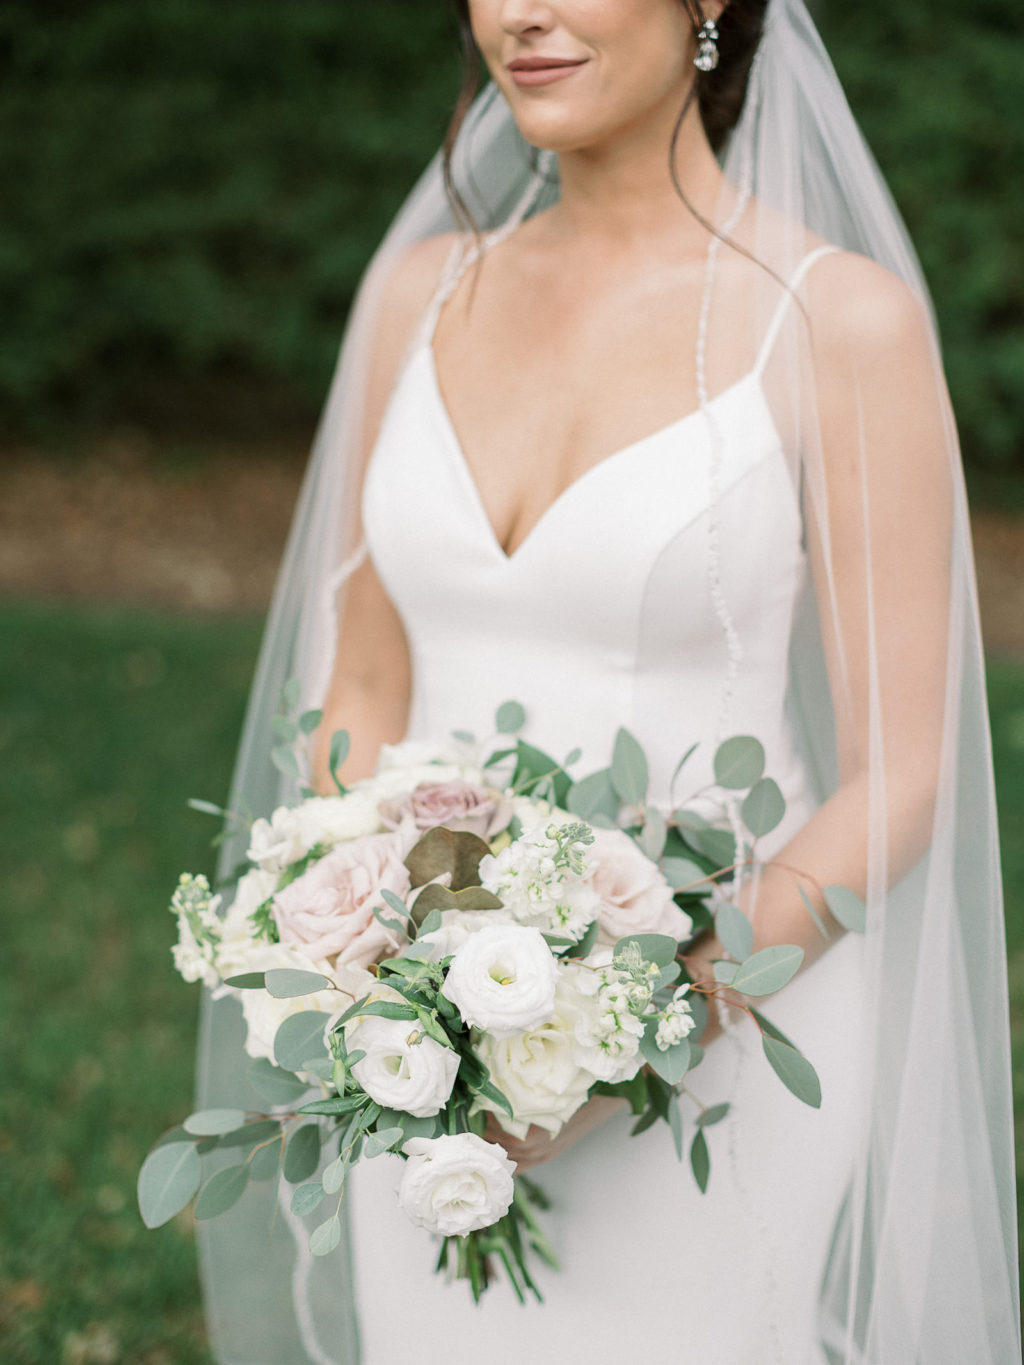 Classic Bride Wearing Paloma Blanca Spaghetti Strap V Neckline Fit and Flare Wedding Dress Holding White and Mauve Roses, Eucalyptus Floral Bouquet